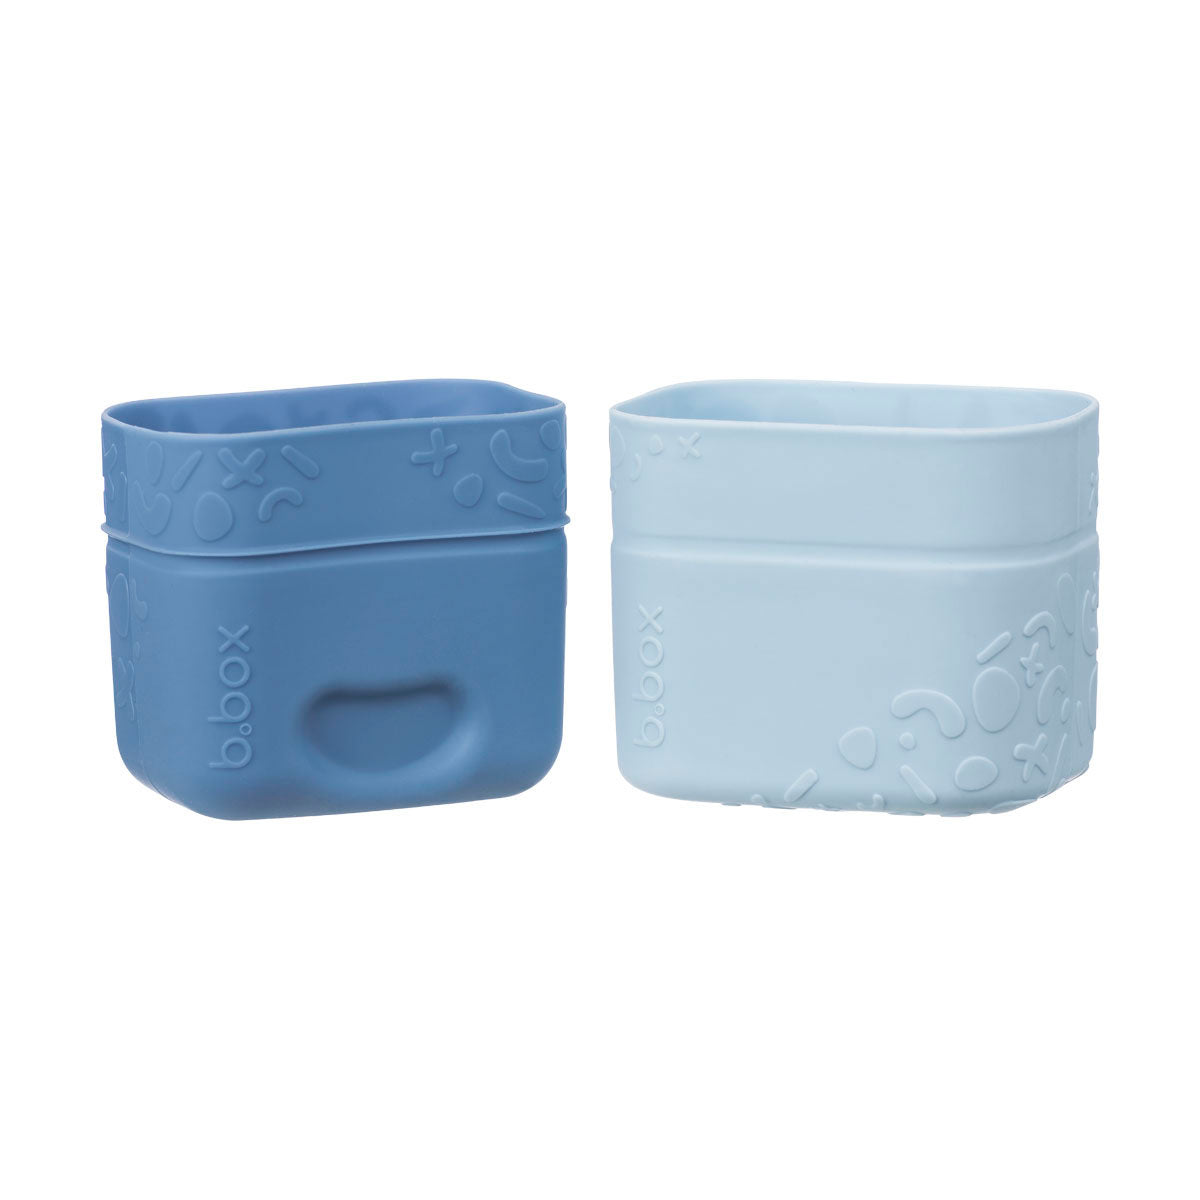 NEW! Silicone Cup for Bento Lunchbox – Ocean - b.box for kids